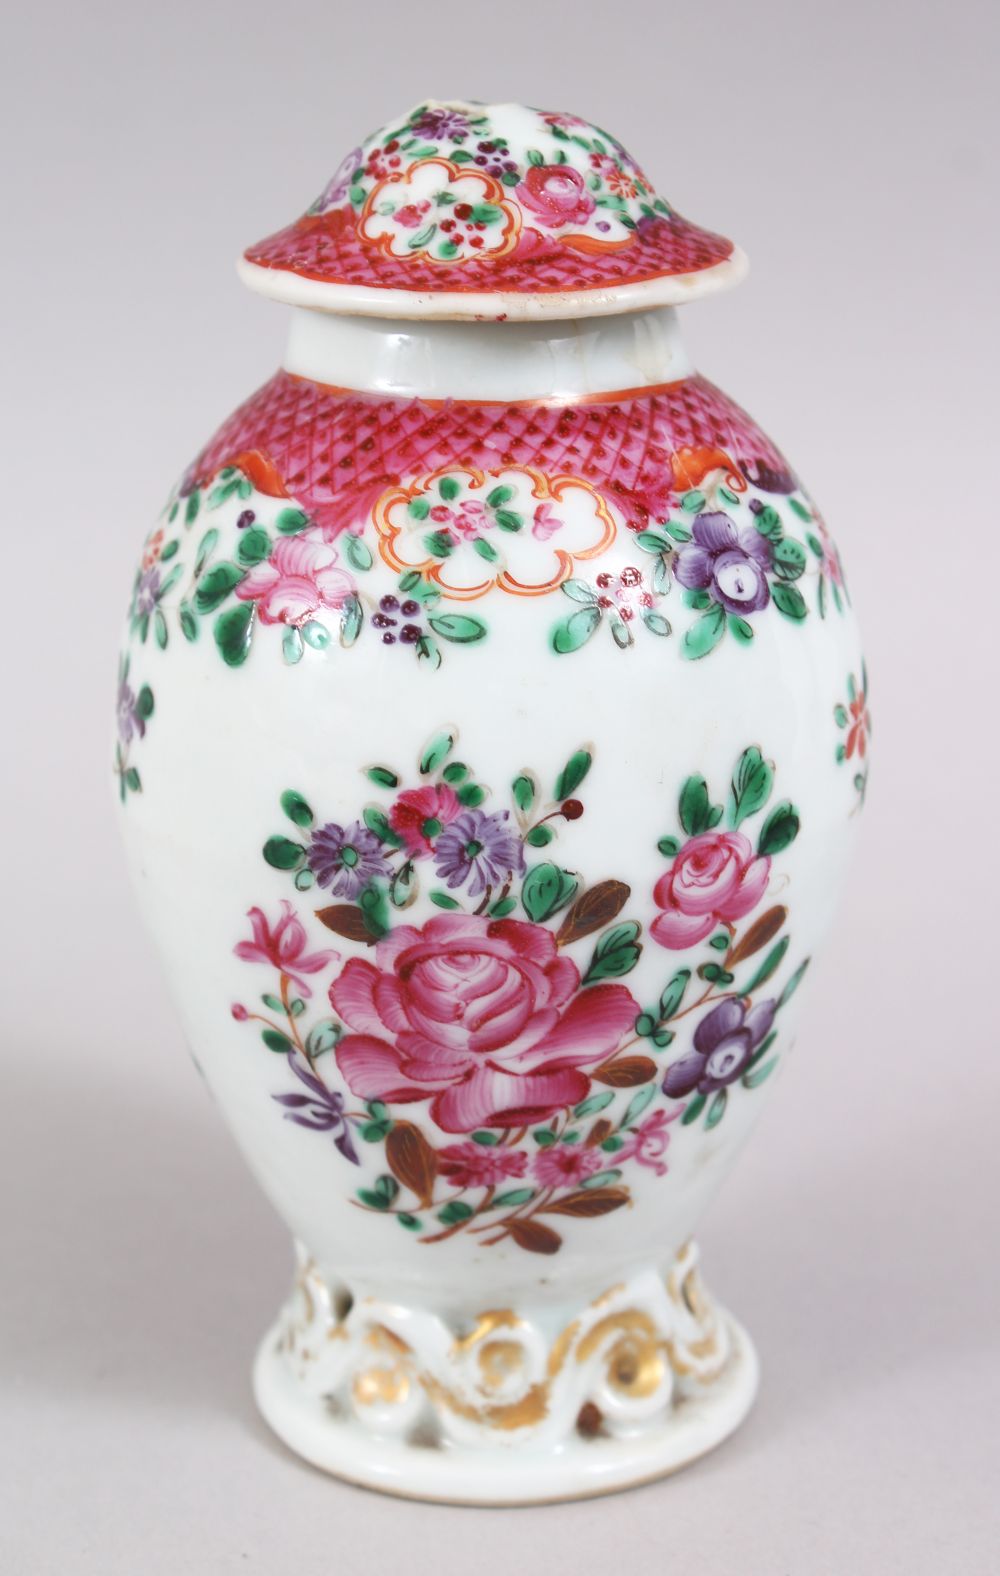 A CHINESE 19TH CENTURY FAMILLE ROSE PORCELAIN TEA CADDY, decorated with floral design, 13cm high.